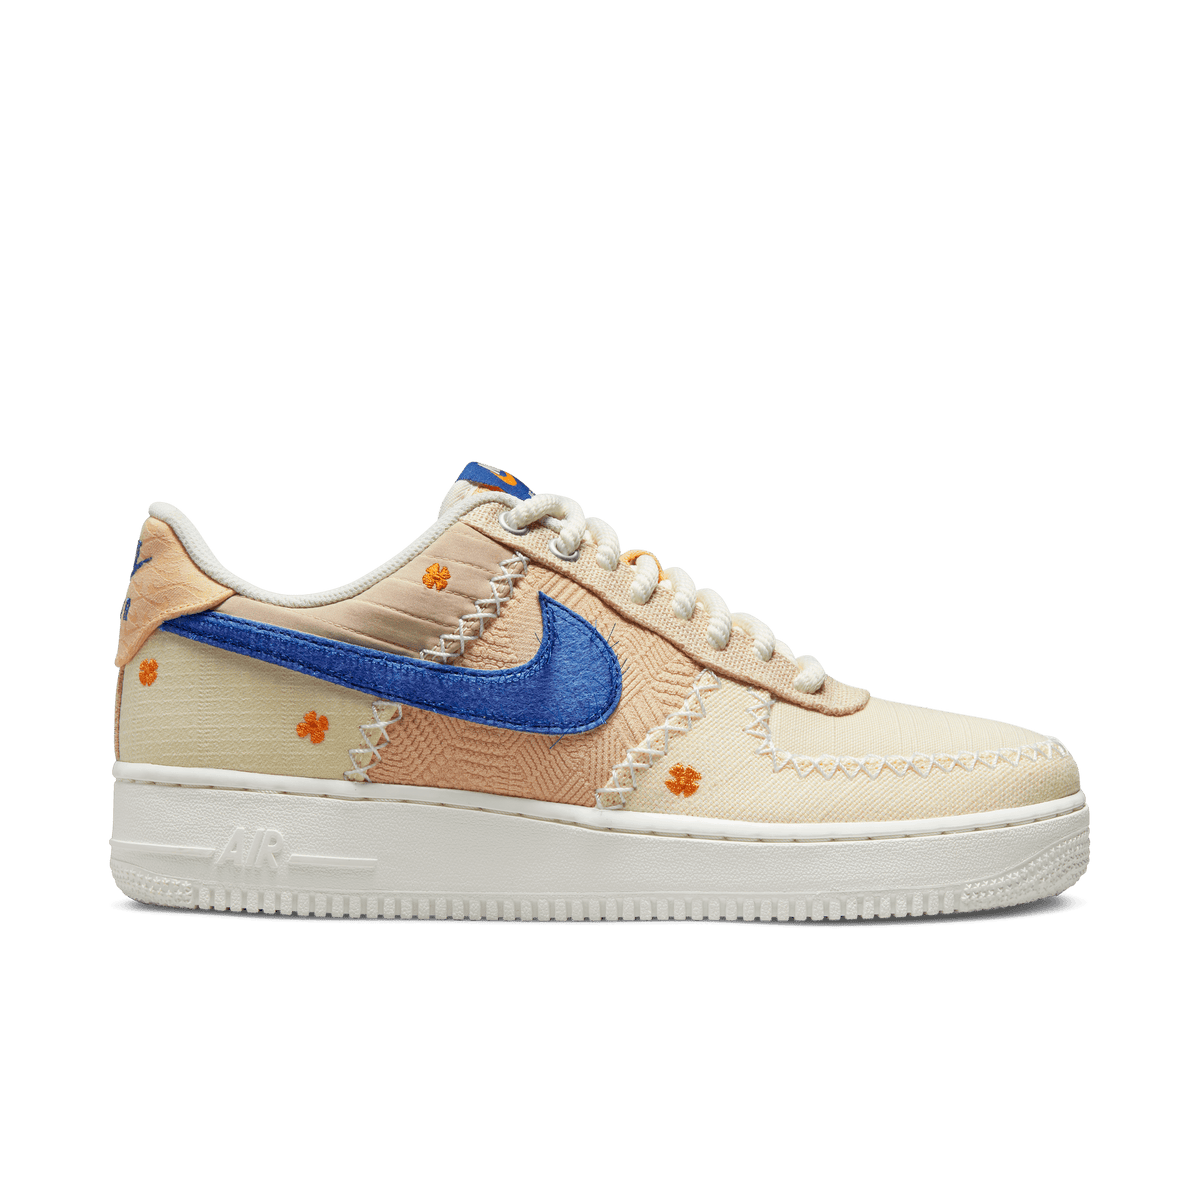 Nike Air Force 1 '07 LV8 EMB - SoleFly